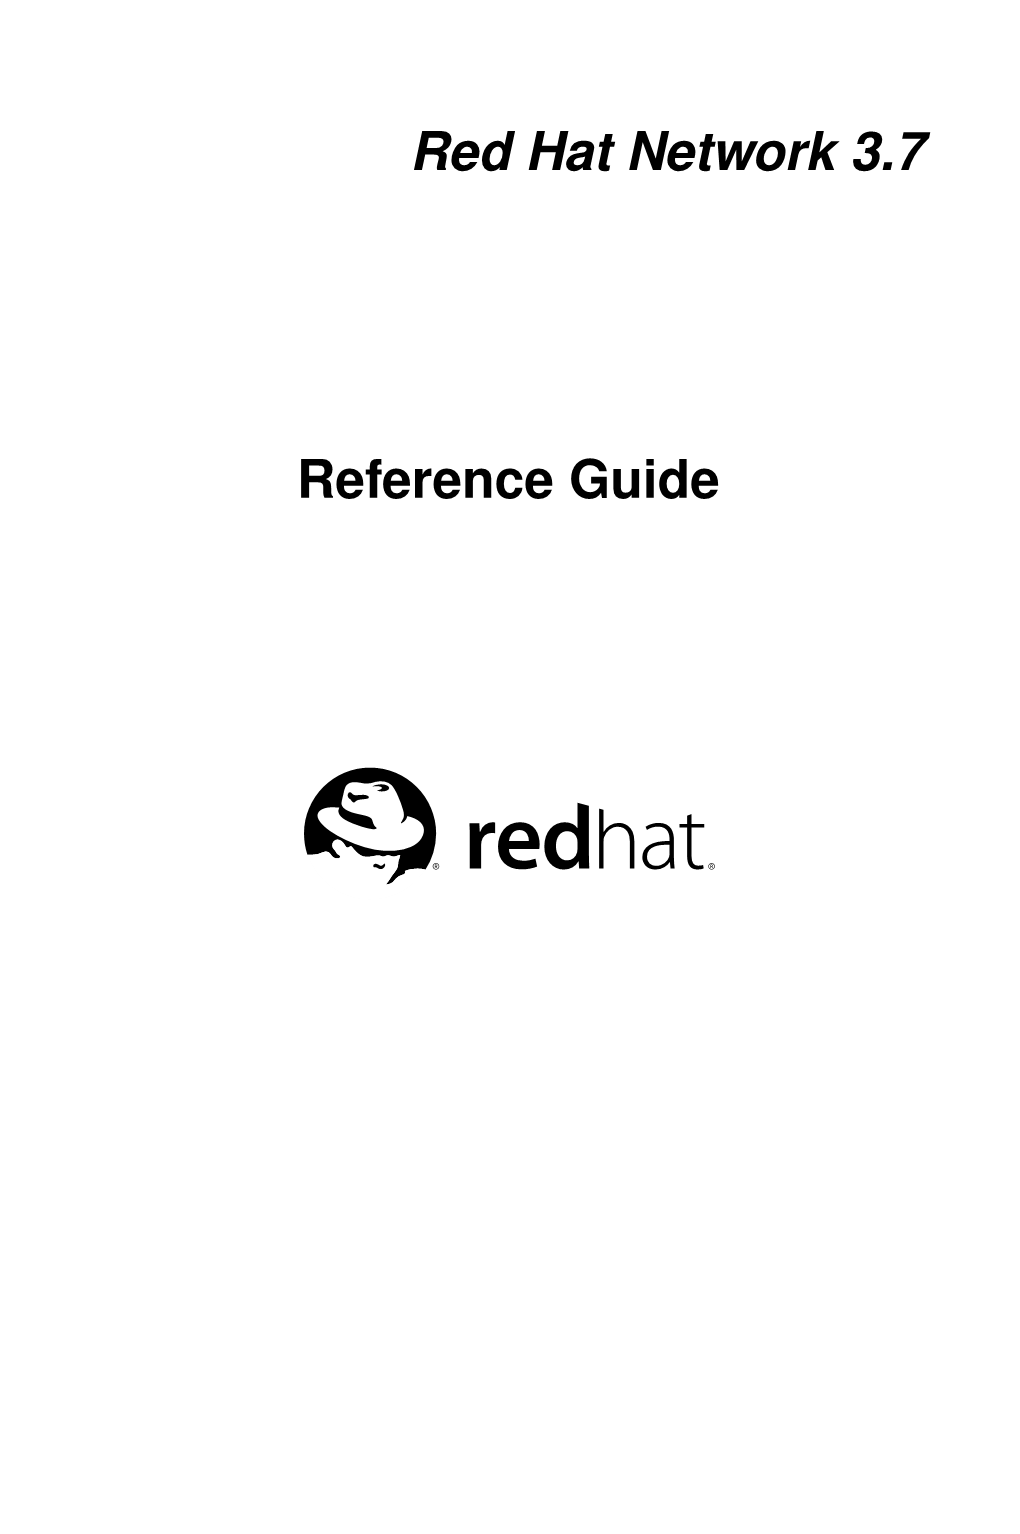 Red Hat Network 3.7 Reference Guide